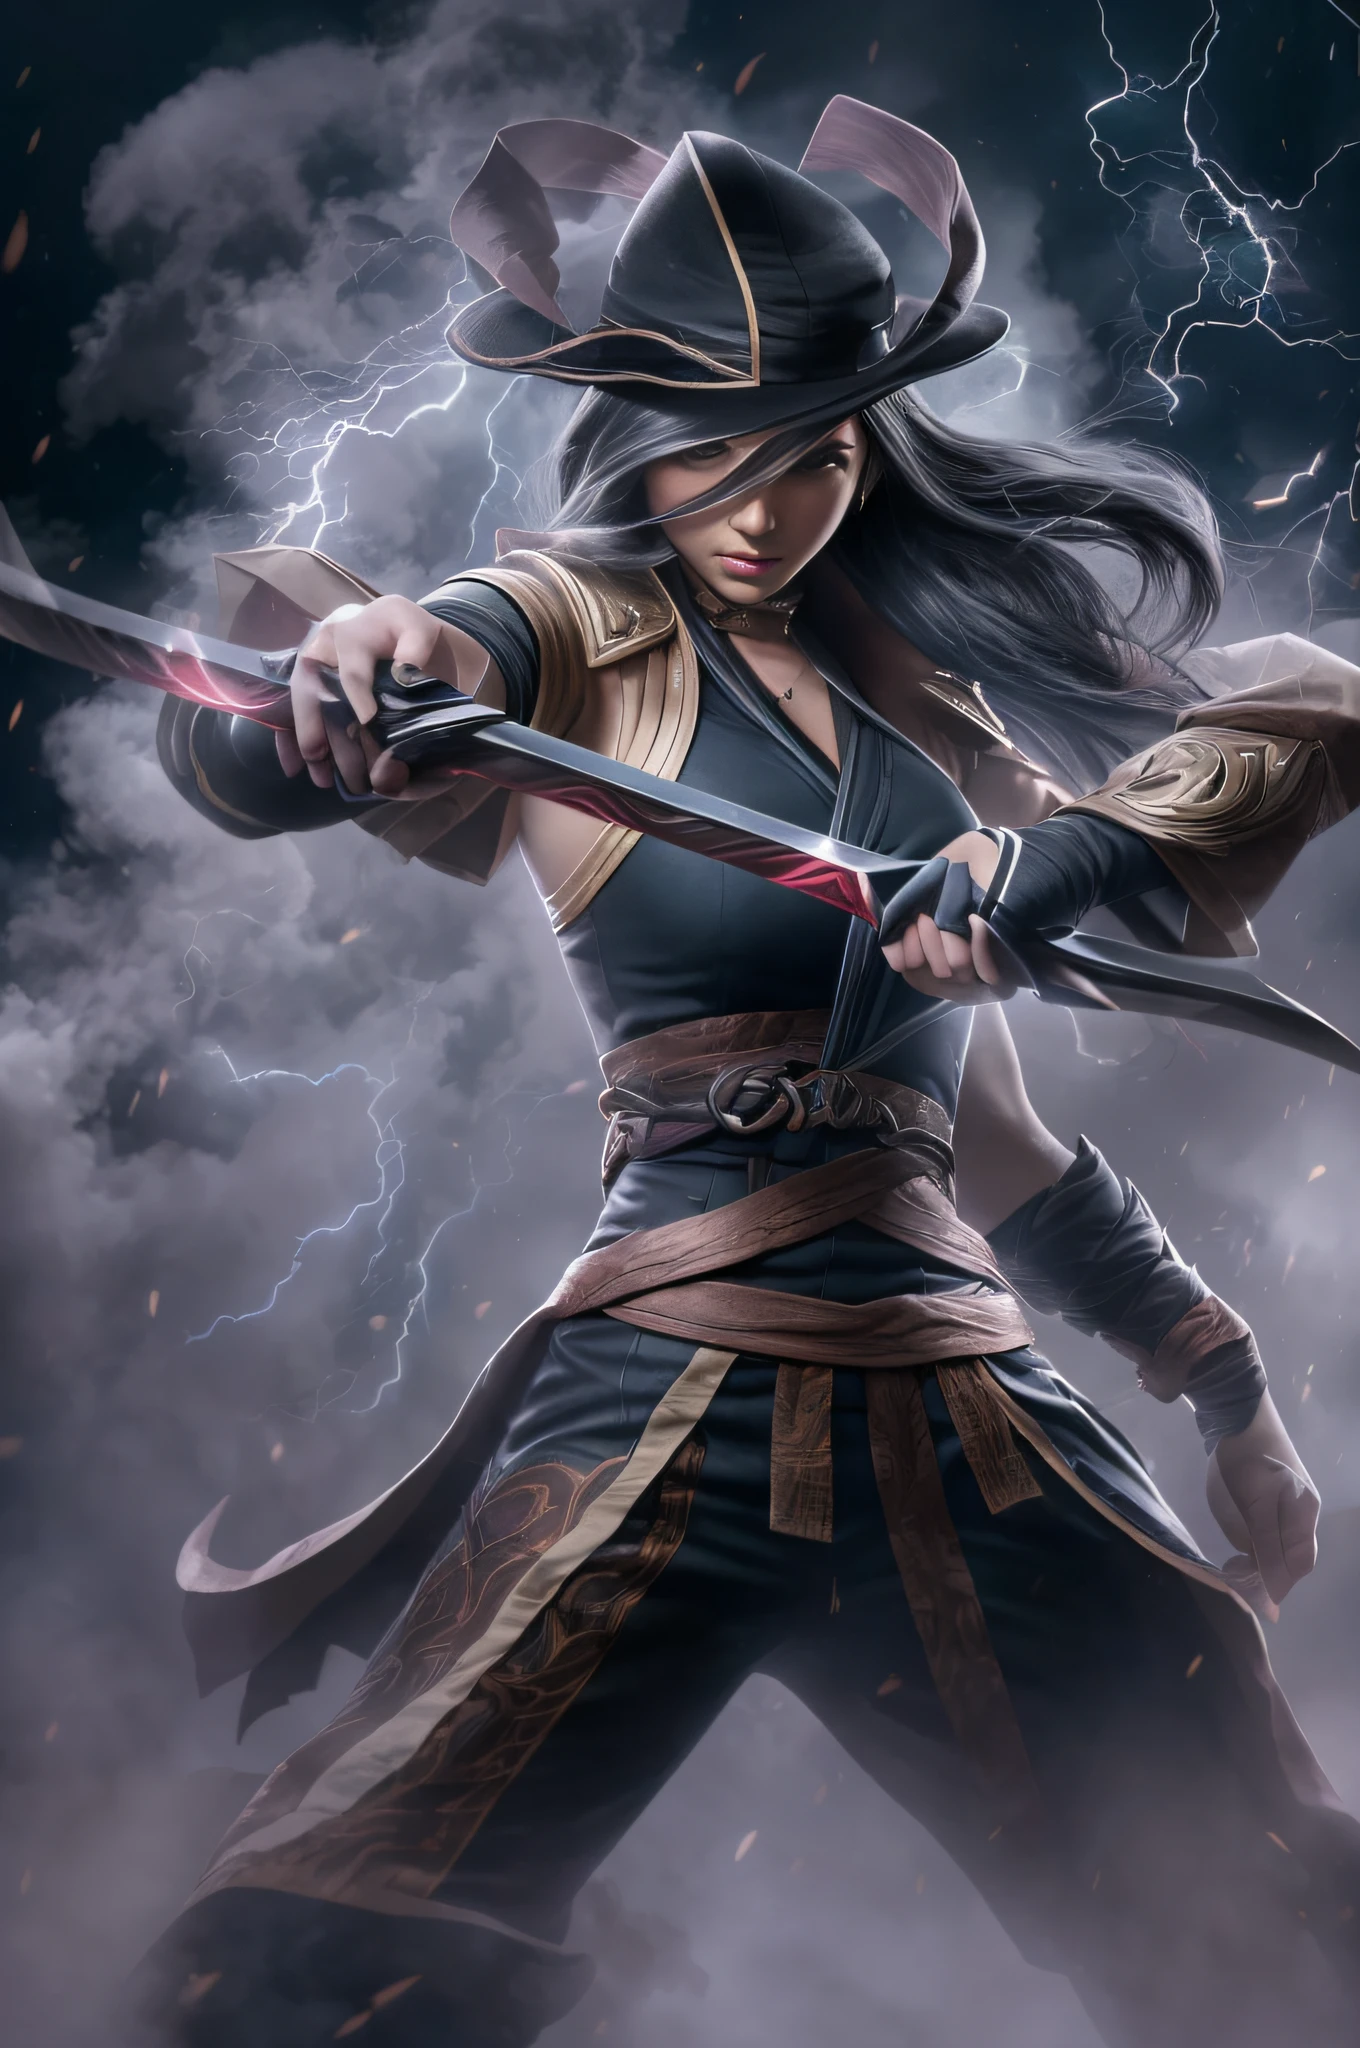 ((akali from league of legends, ultra realisitic)), (((fully body))), ((perfect hands)), Using the Samurai Weapon, old background, chic, gray and black smoke, stunning, hyper realistic, octan render, surrounded by the effect of smoke and lightning,  league of legends style, old background, chic, dazzling, (wall-paper), conceptual artwork, details Intricate, highy detailed, ((cinemactic)), Dramatic, (highest quallity, awarded, Masterpiece artwork:1.5), (photorrealistic:1.5), fot, Realistic photo, Nikon, naturallight, 4K, highes definition, xf iq4, 150MP, 50 millimeters, ISO 1000 Certification, 1/250s, naturallight, Adobe Lightroom, photolab, Photographic Affinity, PhotoDirector 365,